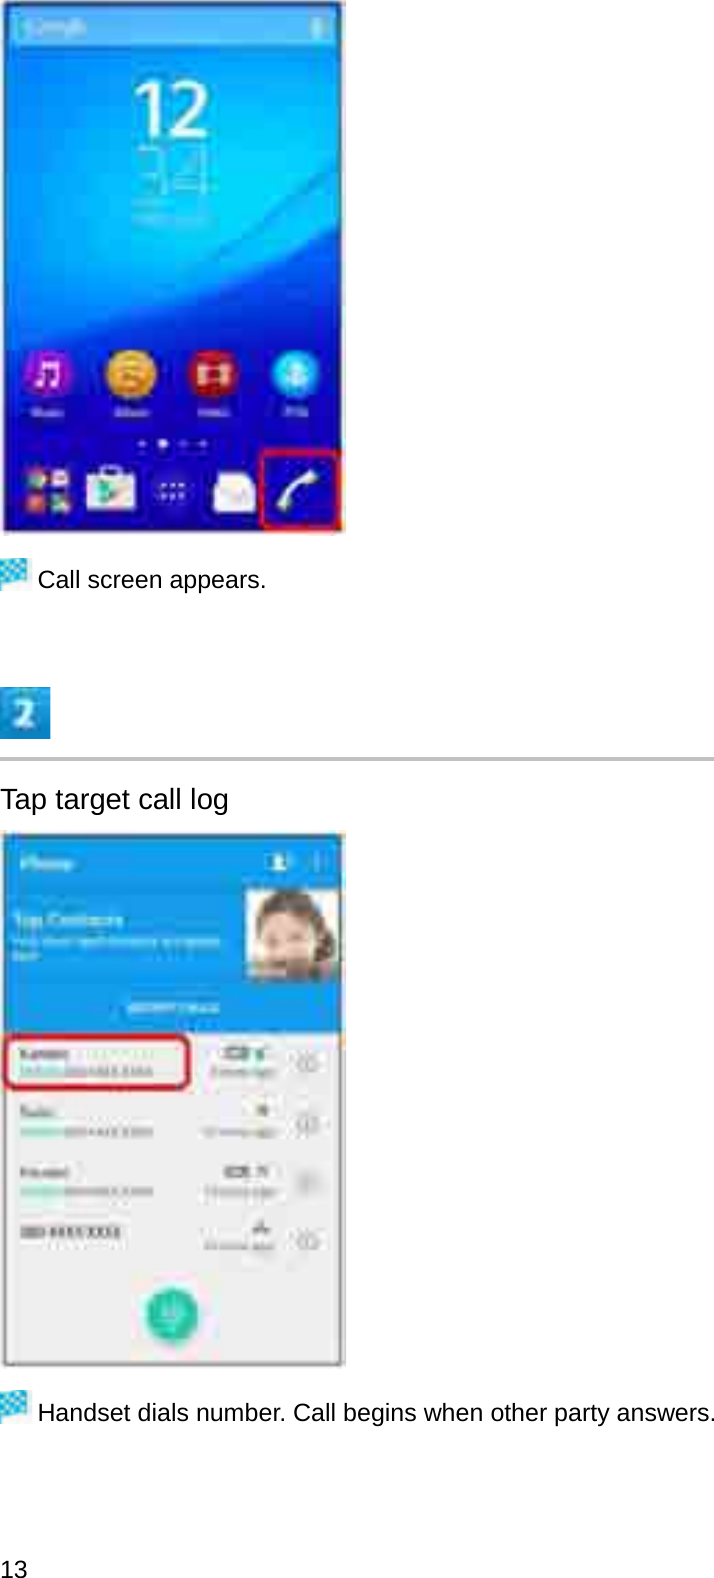 Call screen appears.Tap target call logHandset dials number. Call begins when other party answers.13